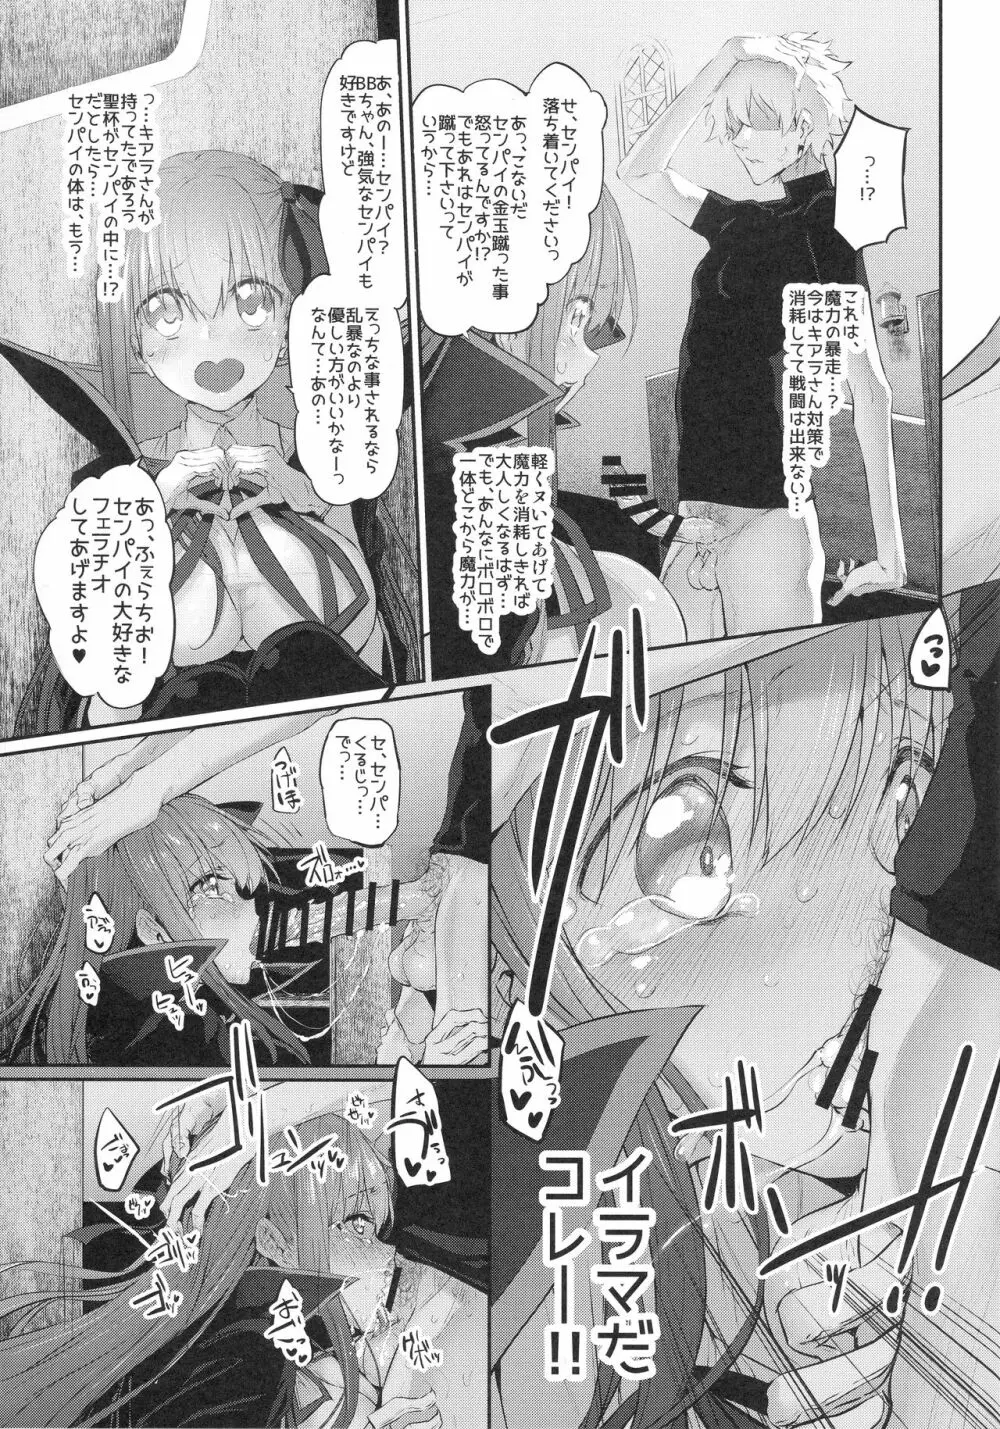 Marked girls vol. 15 Page.16